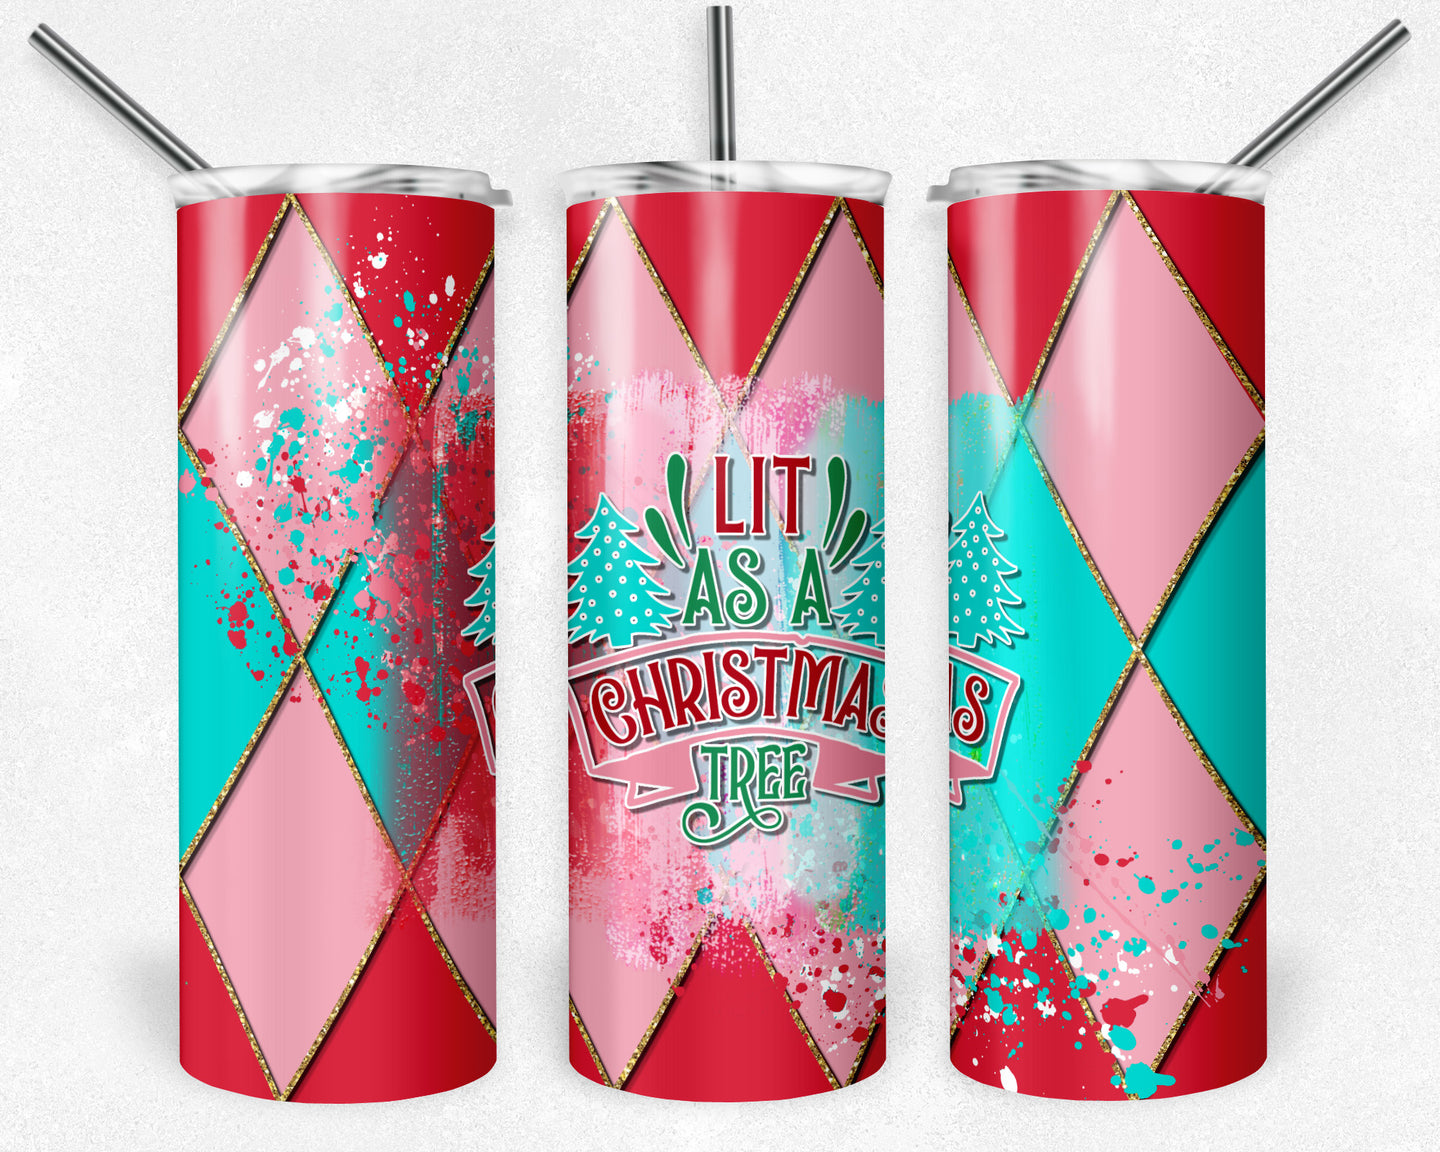 Lit as a Christmas Tree on Red Pink Teal and Gold Argyle Plaid